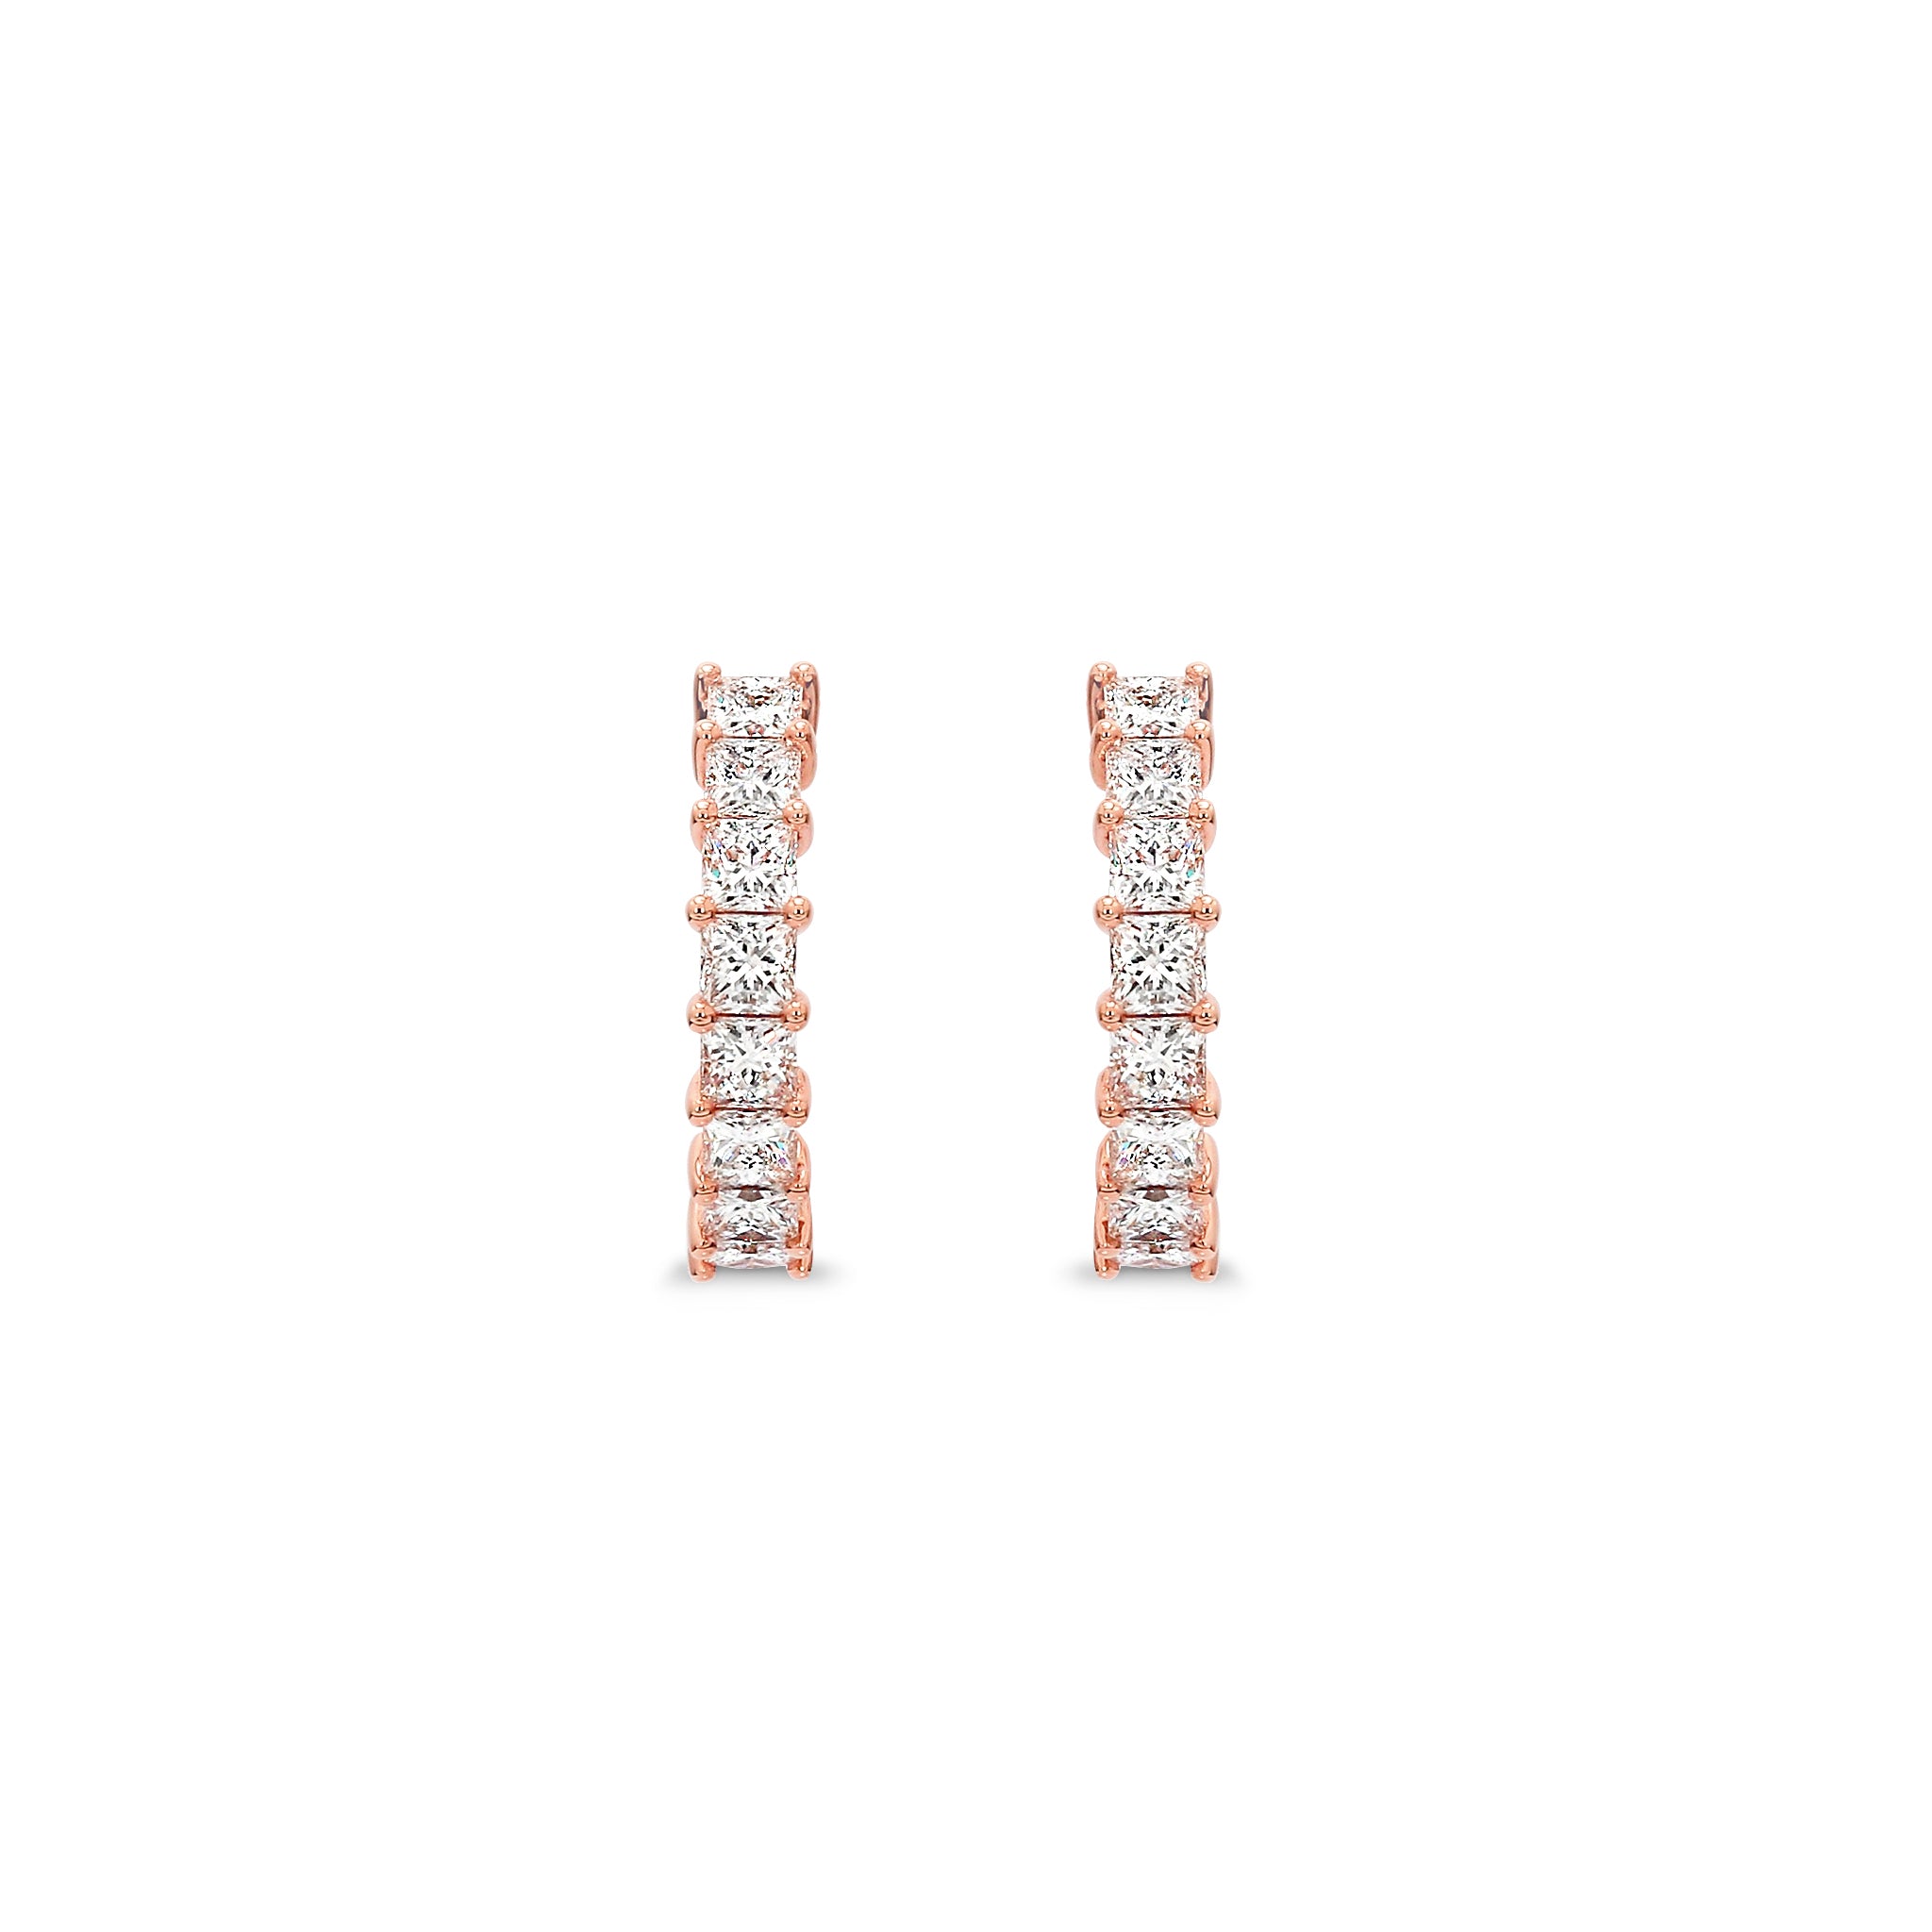 Shimansky - My Girl Claw Set Diamond Huggie Earrings 1.80ct Crafted in 18K Rose Gold